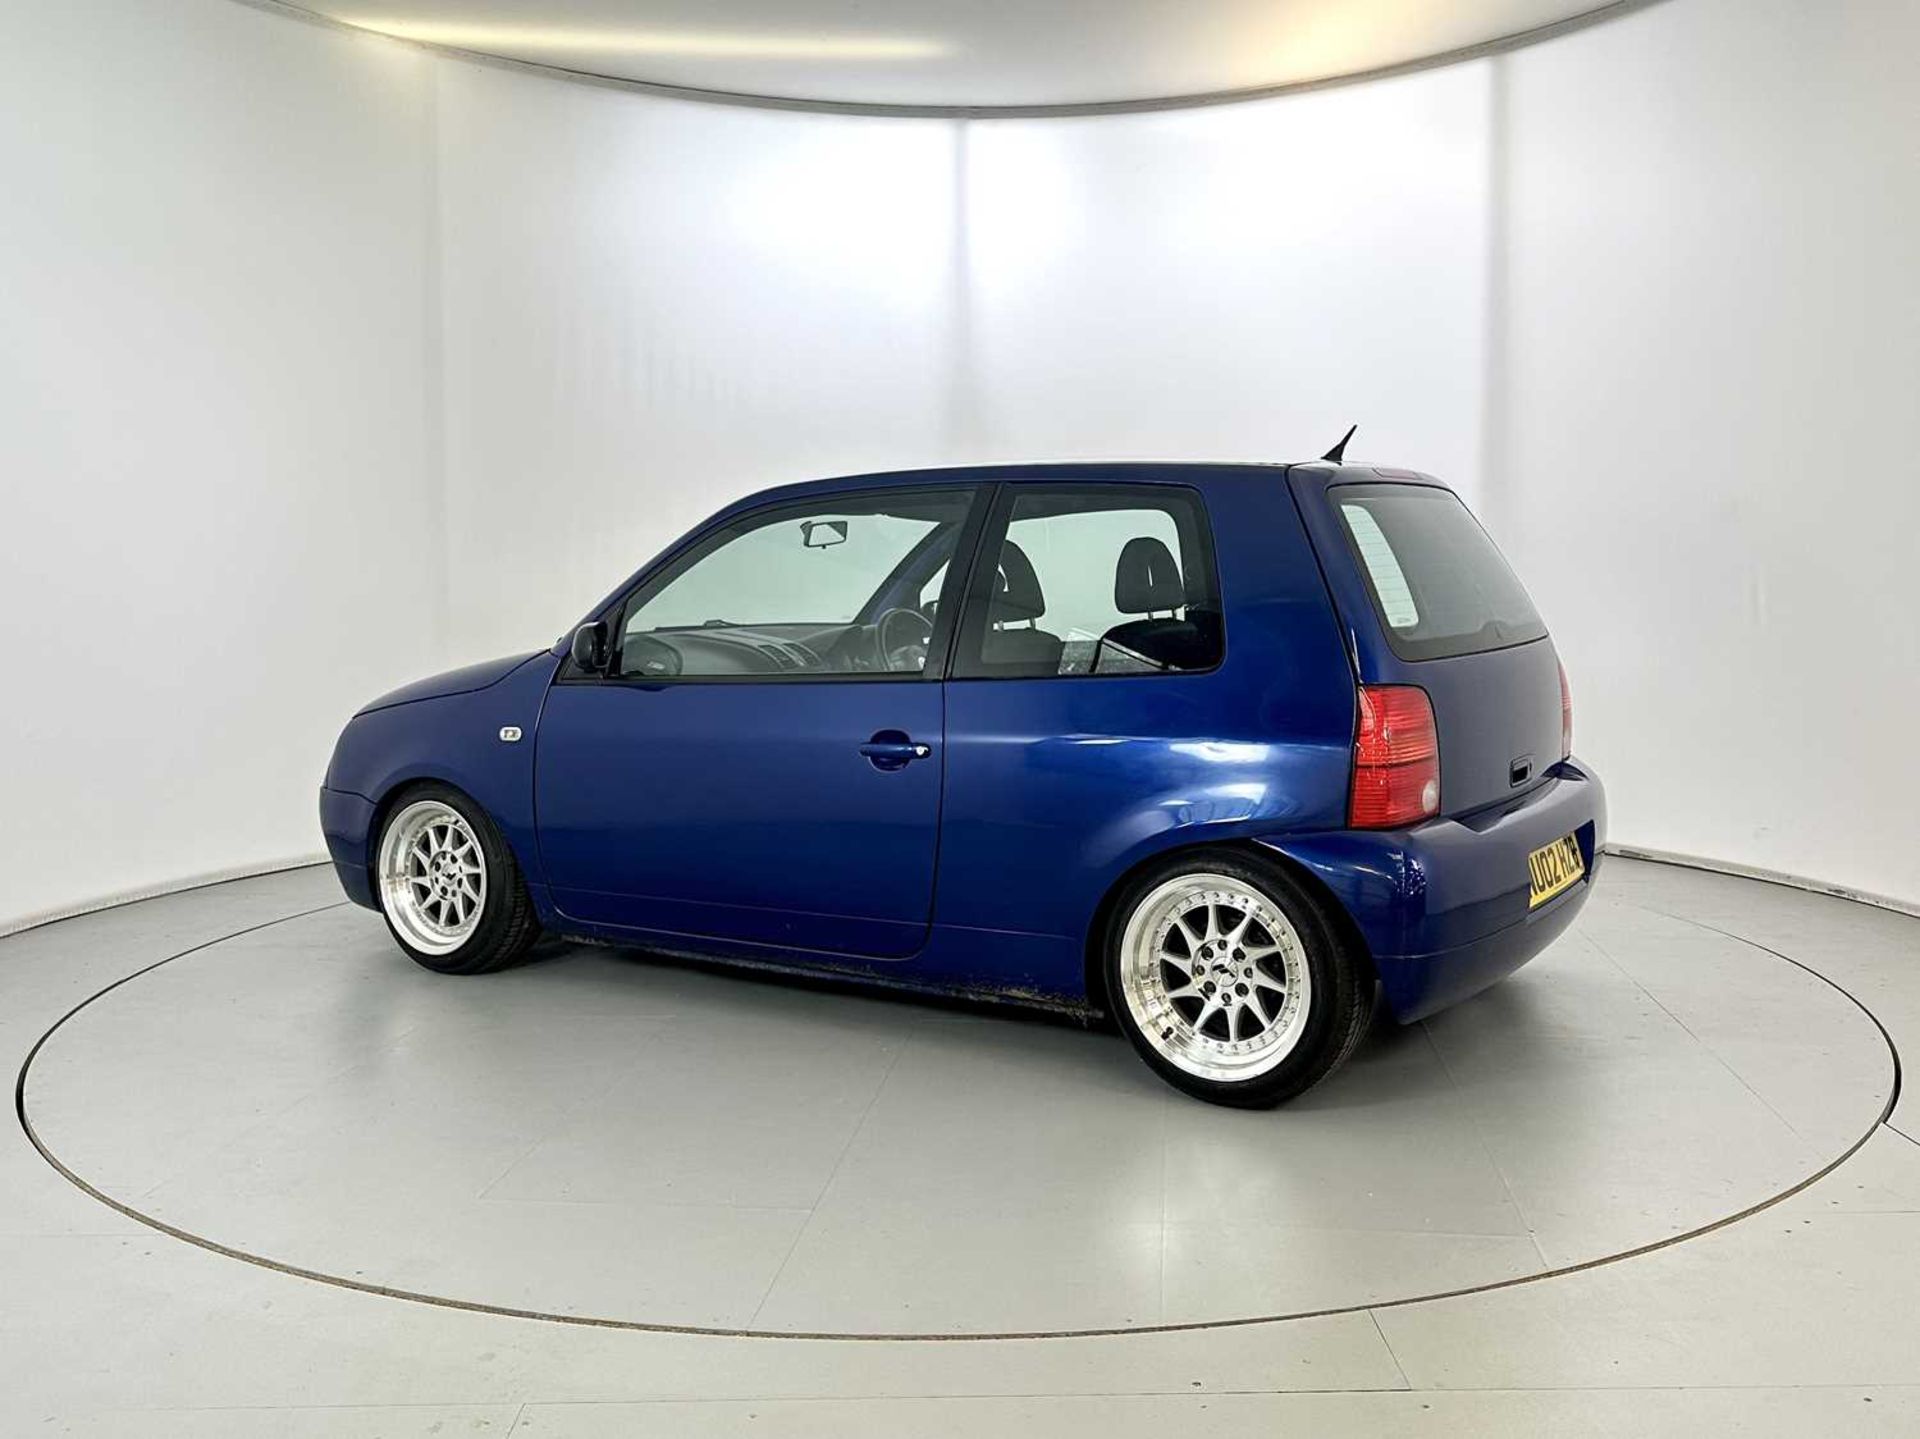 2002 Volkswagen Lupo - Image 6 of 28